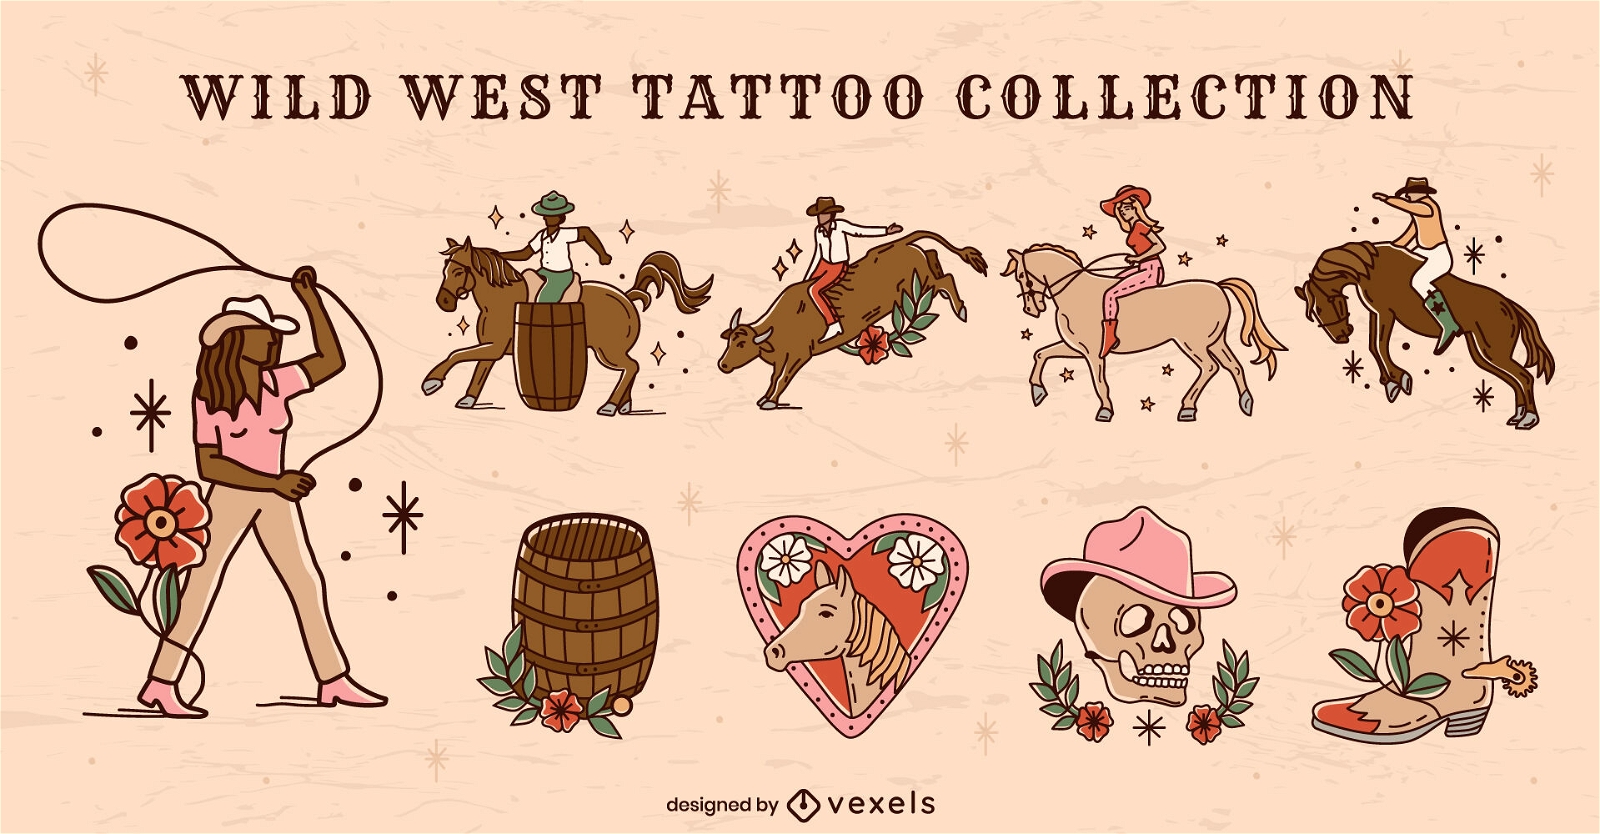 xahhx Jake Arnette  Traditional tattoo painting Traditional tattoo art Cowboy  tattoos